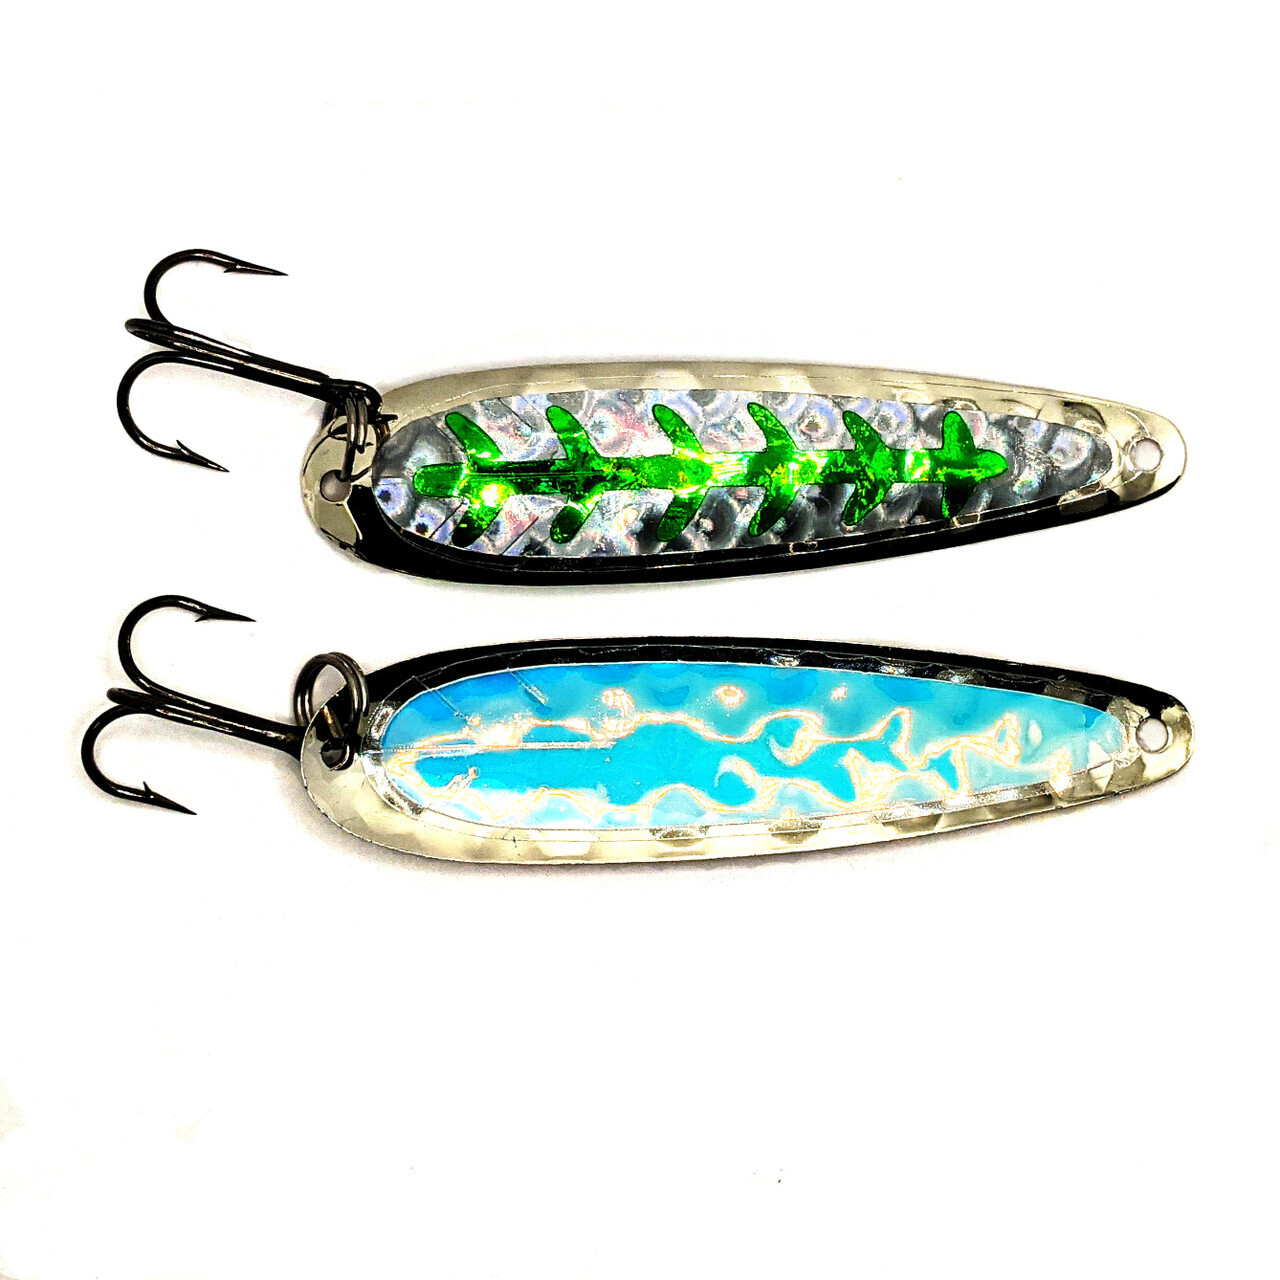 Salmon Candy Mag Spoons